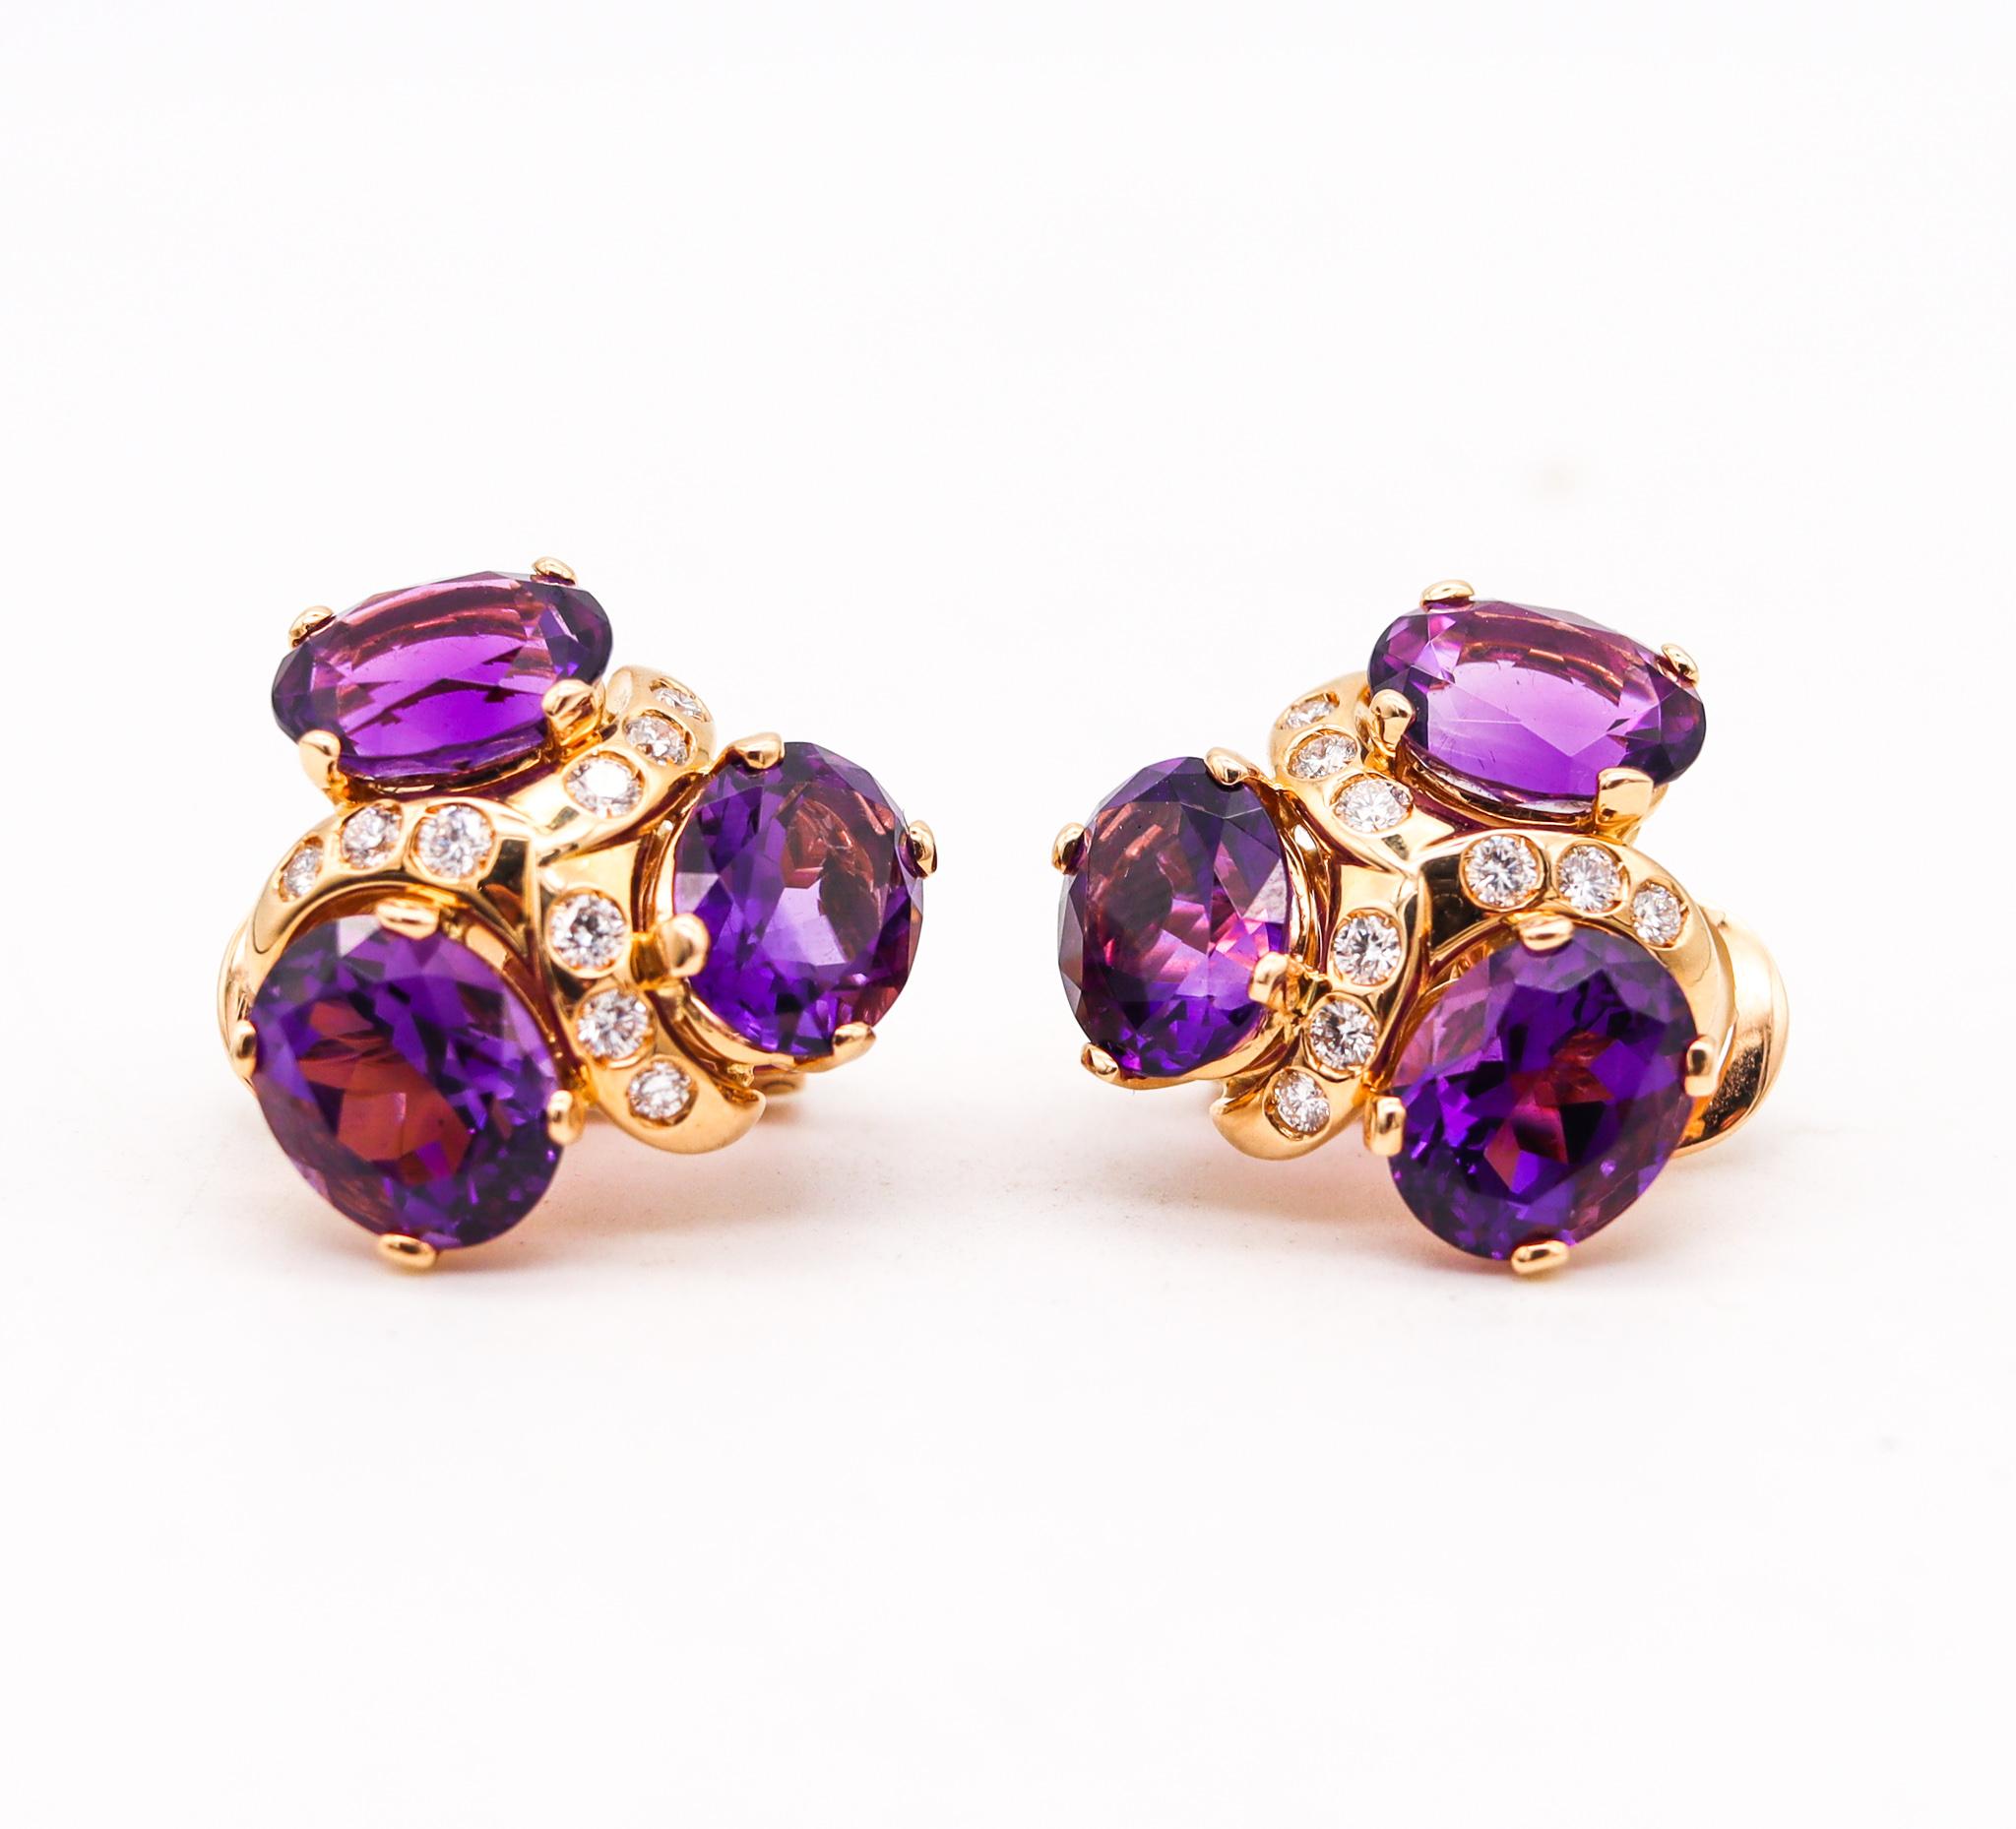 Modernist Verdura Milano Clips Earrings in 18Kt Gold with 17.14 Cts in Diamonds & Amethyst